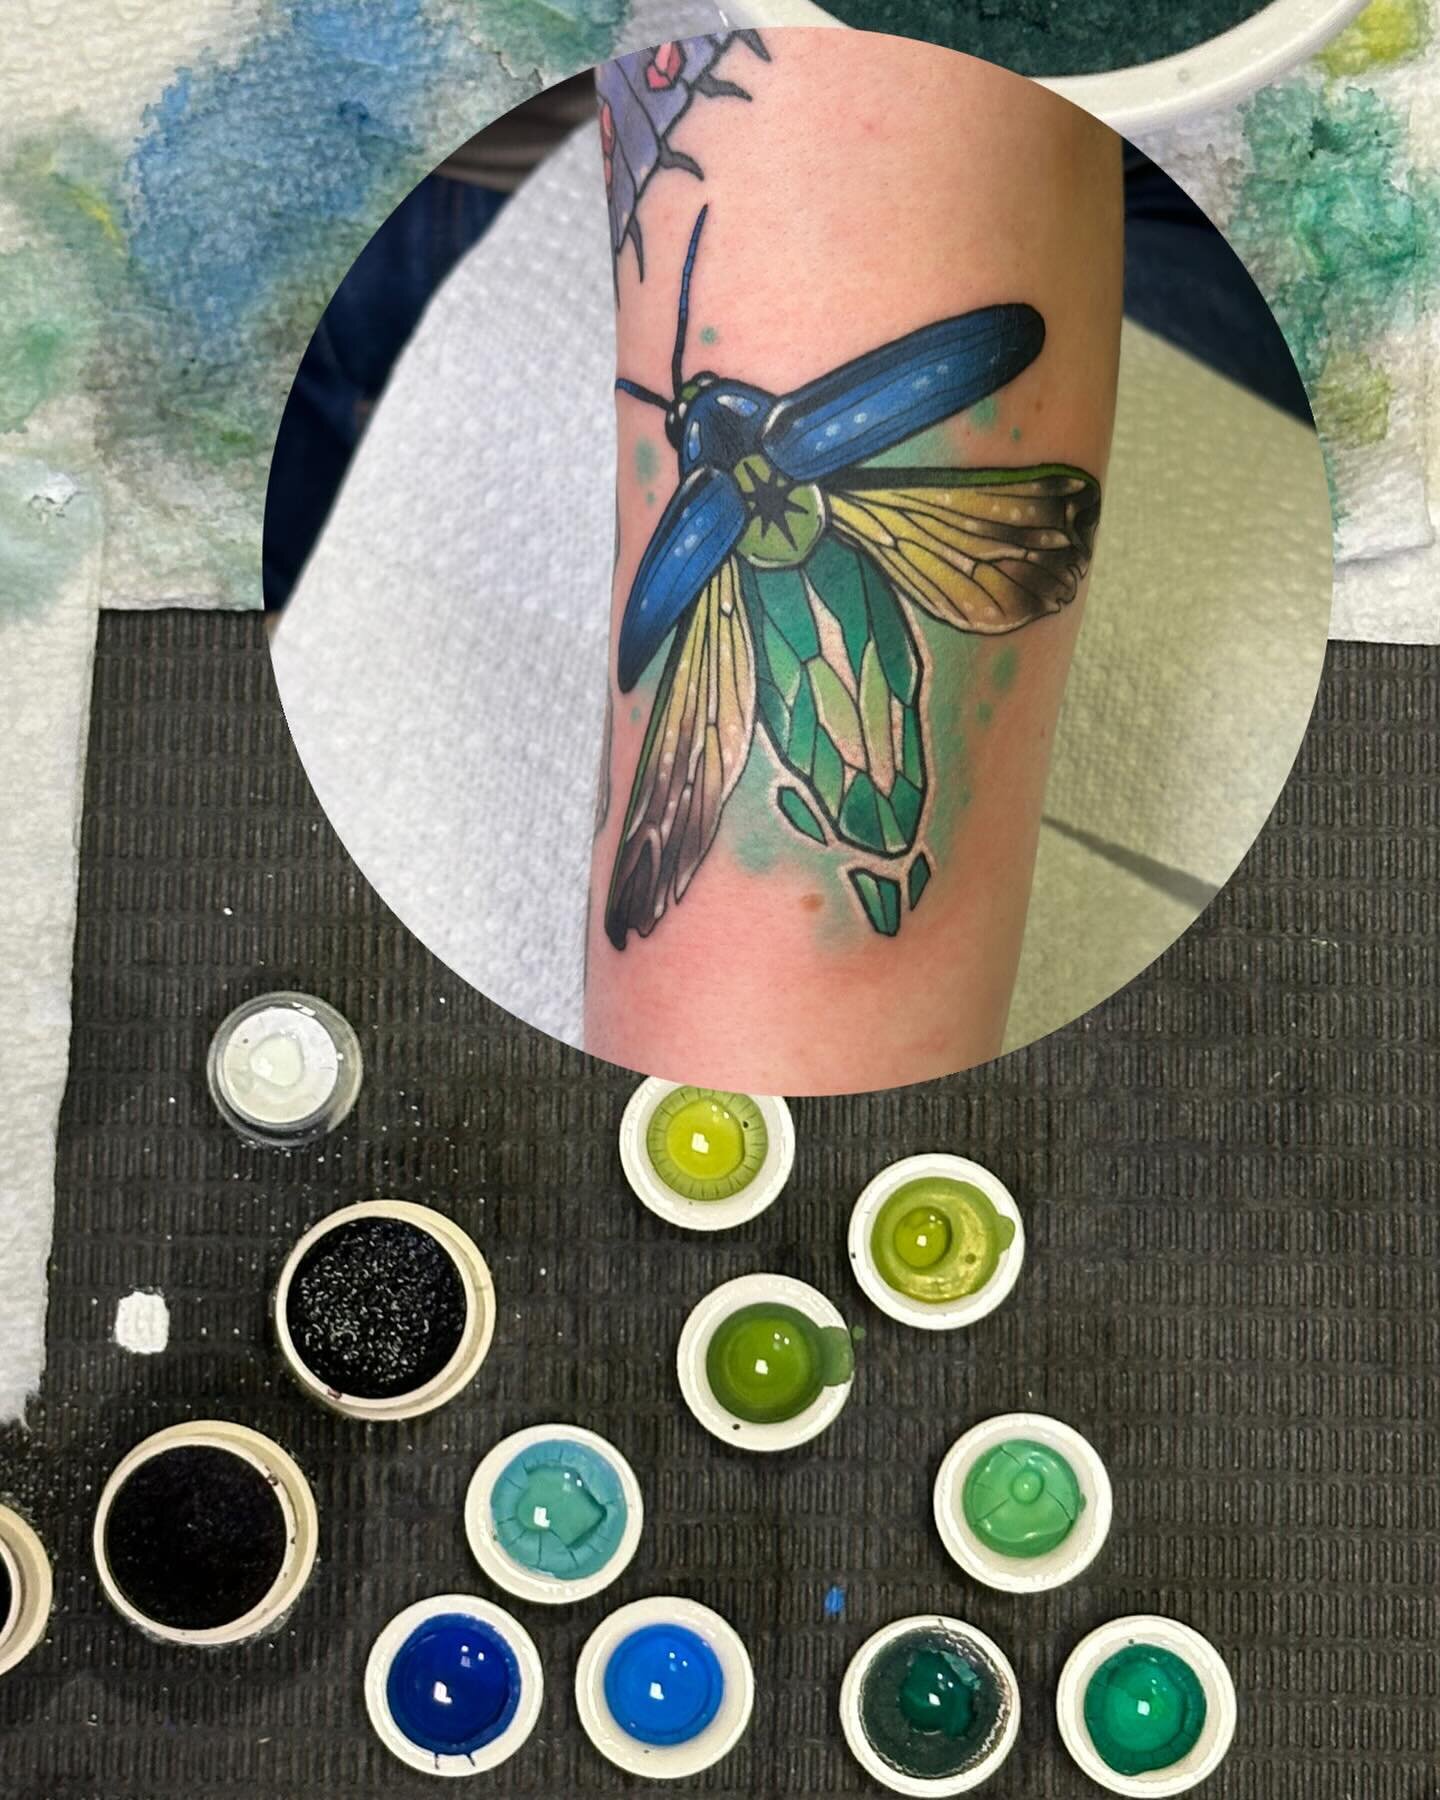 A fancy lil lightning bug, inspired by the blue ghost firefly, with a crystal butt of course✨ From a while back on Kristin
.
Always down to do more lil winged guys! Realistic or fanciful~
.
.
.
#Tattoo #ladytattooers #ohiotattooers #columbustattooers